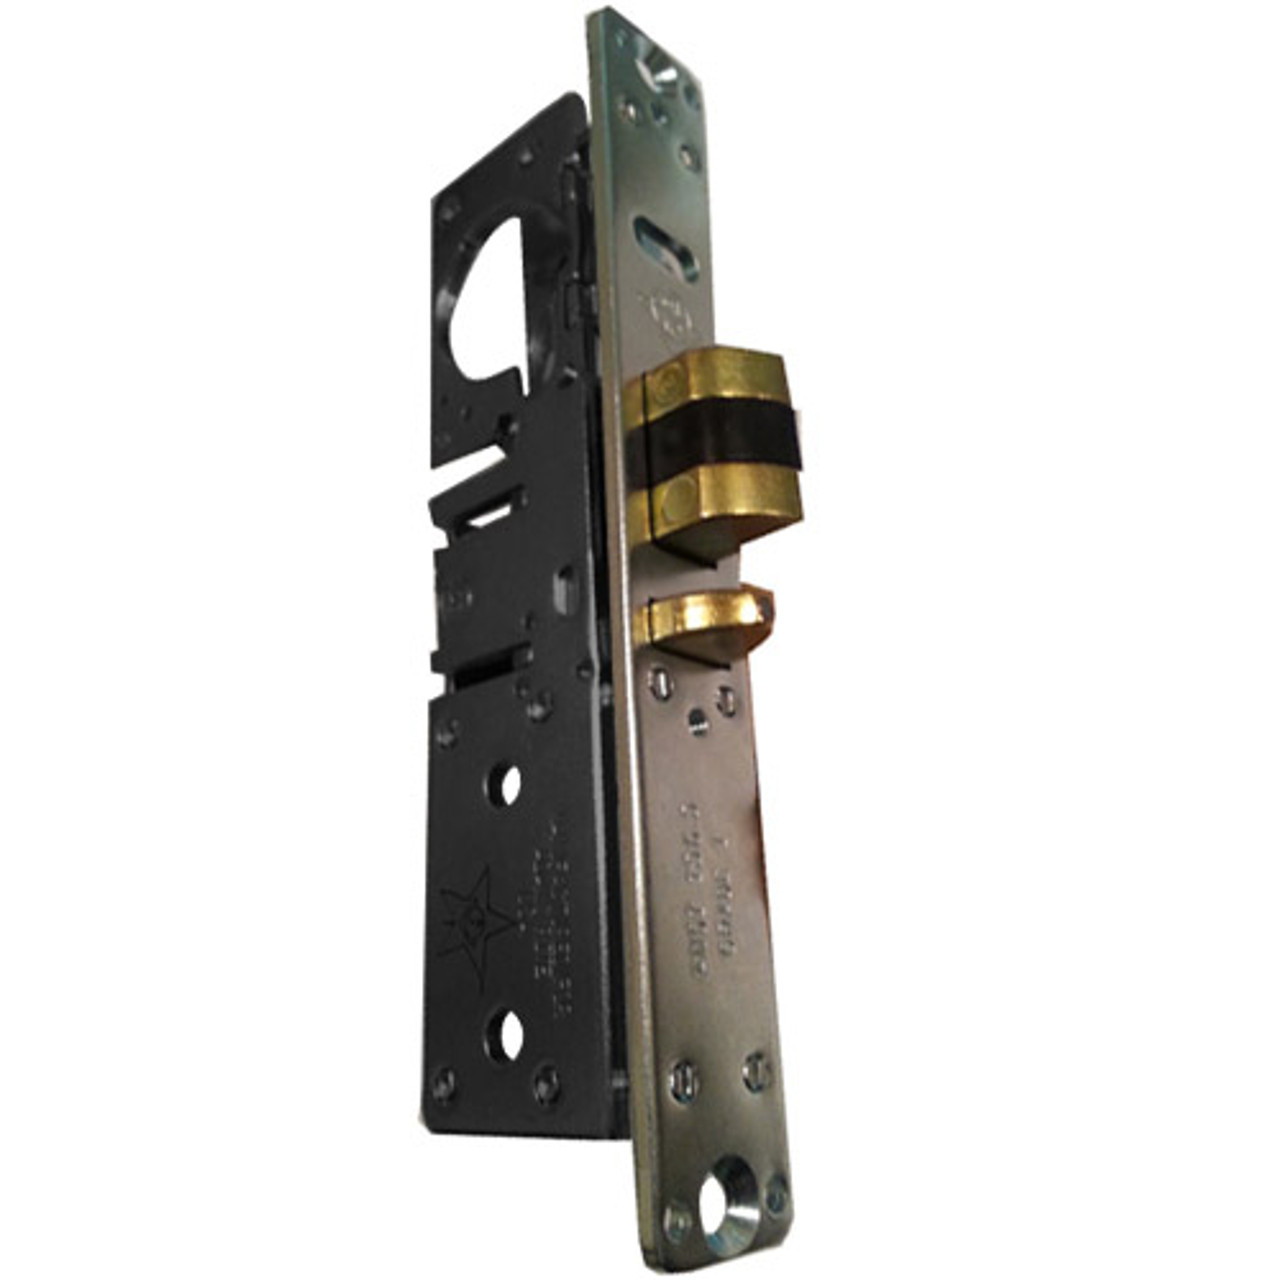 4511W-26-117-335 Adams Rite Standard Deadlatch with Radius Faceplate with weatherstrip in Black Anodized Finish